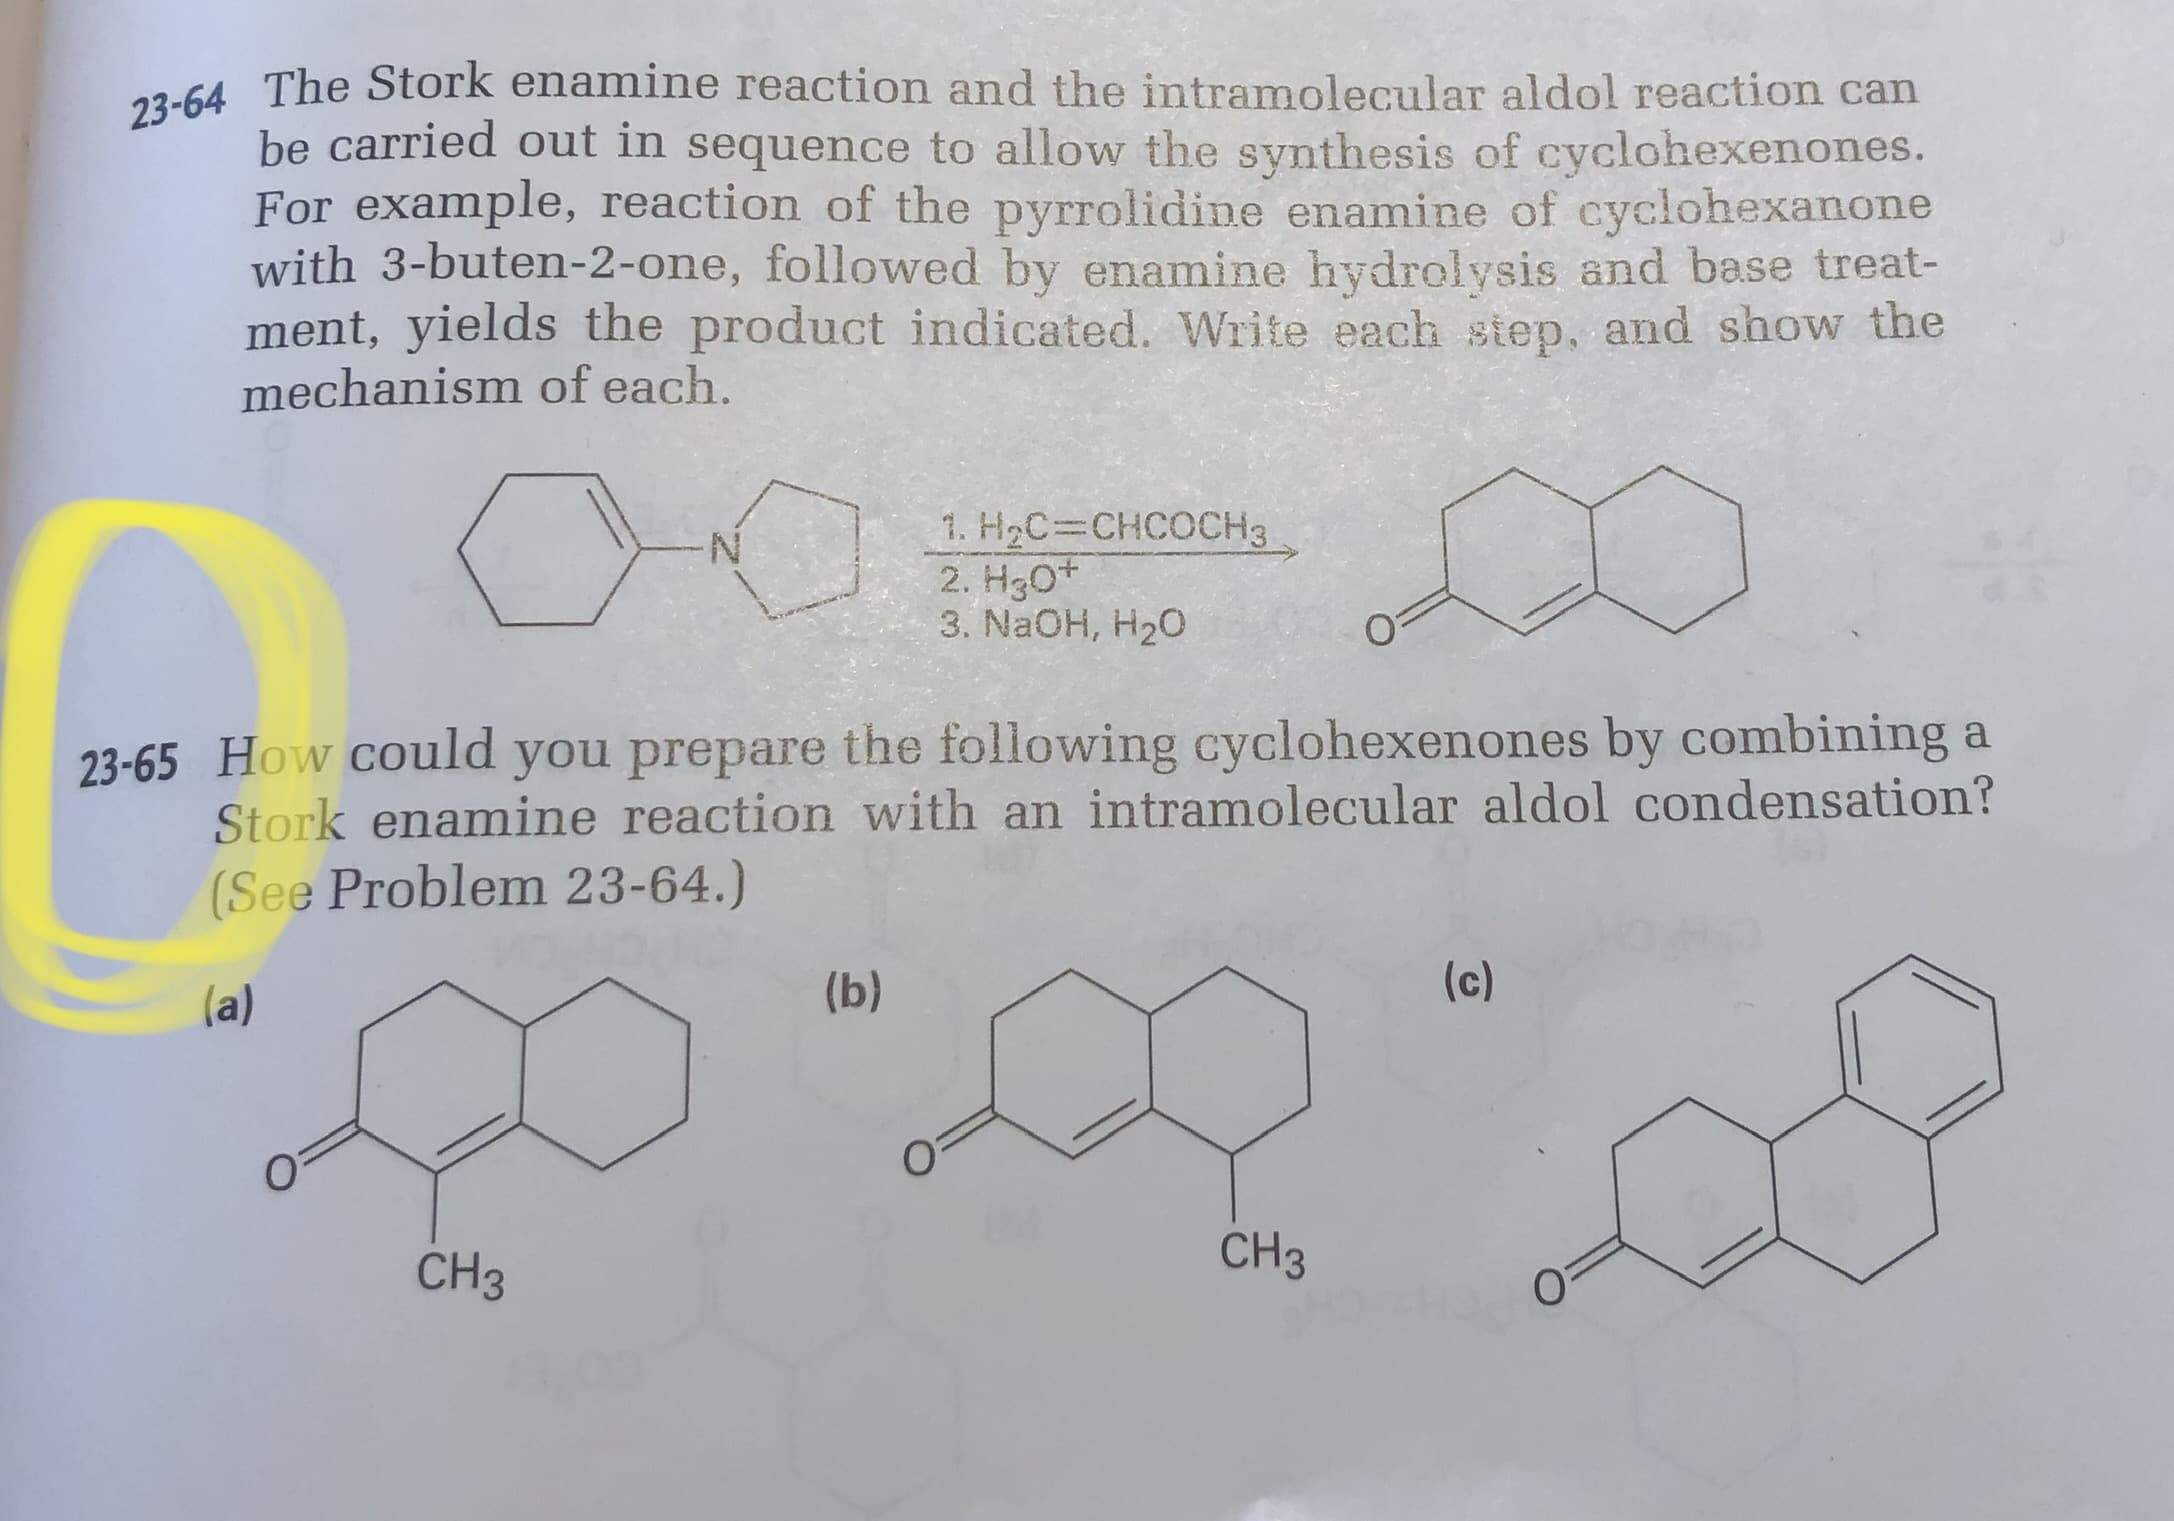 23-65 How could you prepare the following cyclohexenones by combining a
Stork enamine reaction with an intramolecular aldol condensation?
(See Problem 23-64.)
(a)
(b)
(c)
CH3
CH3
